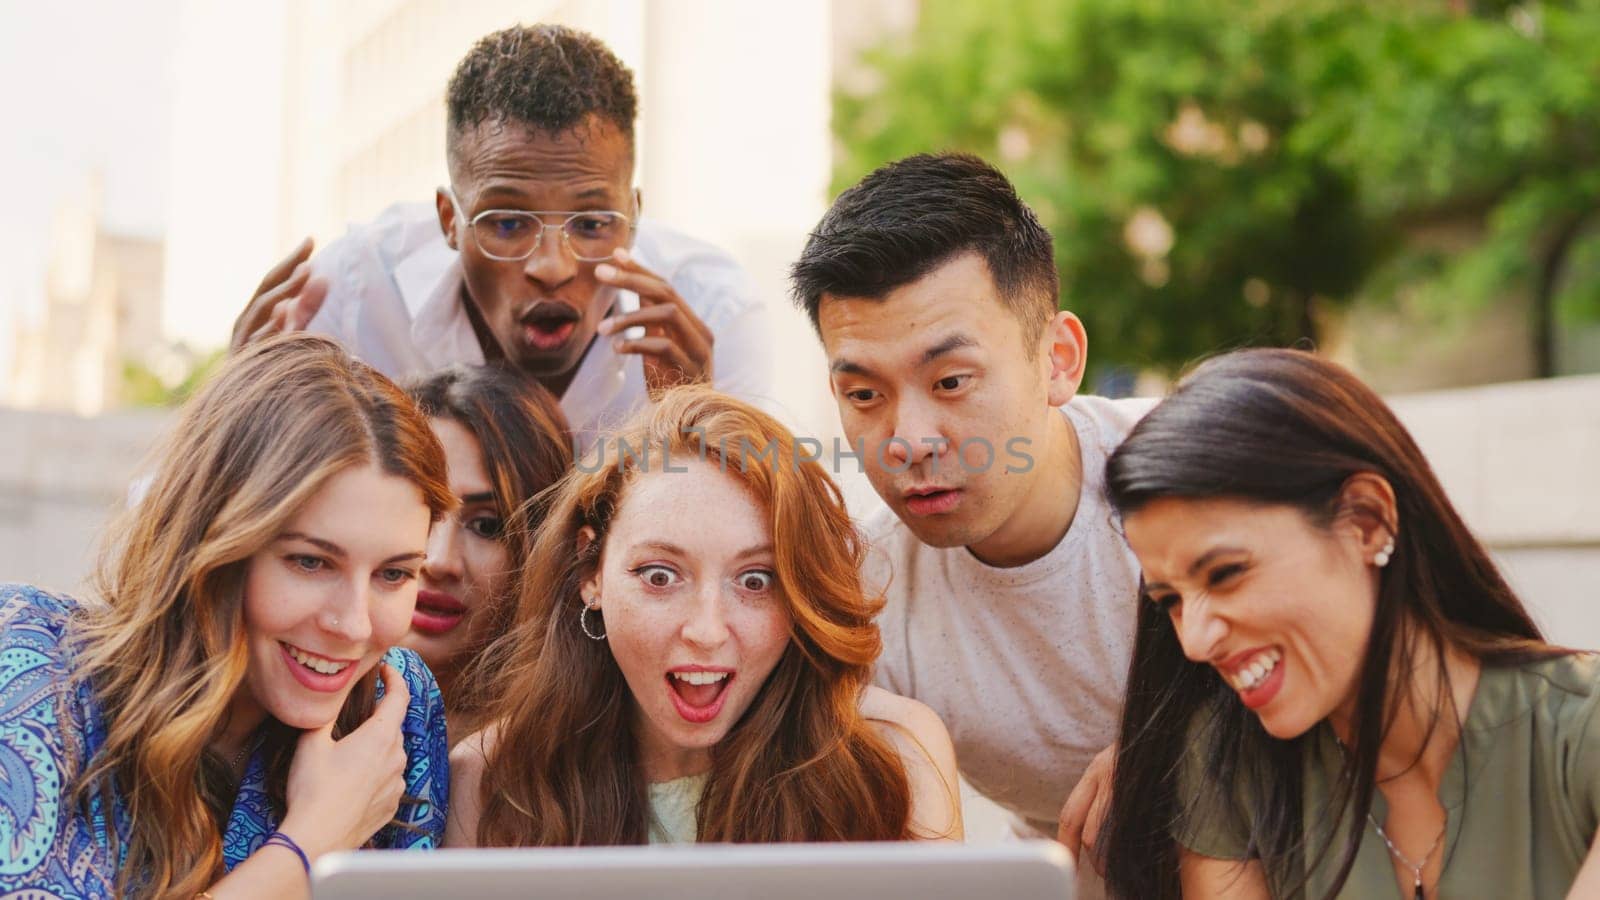 Multiethnic group of people looking at a laptop with surprised expression by ivanmoreno